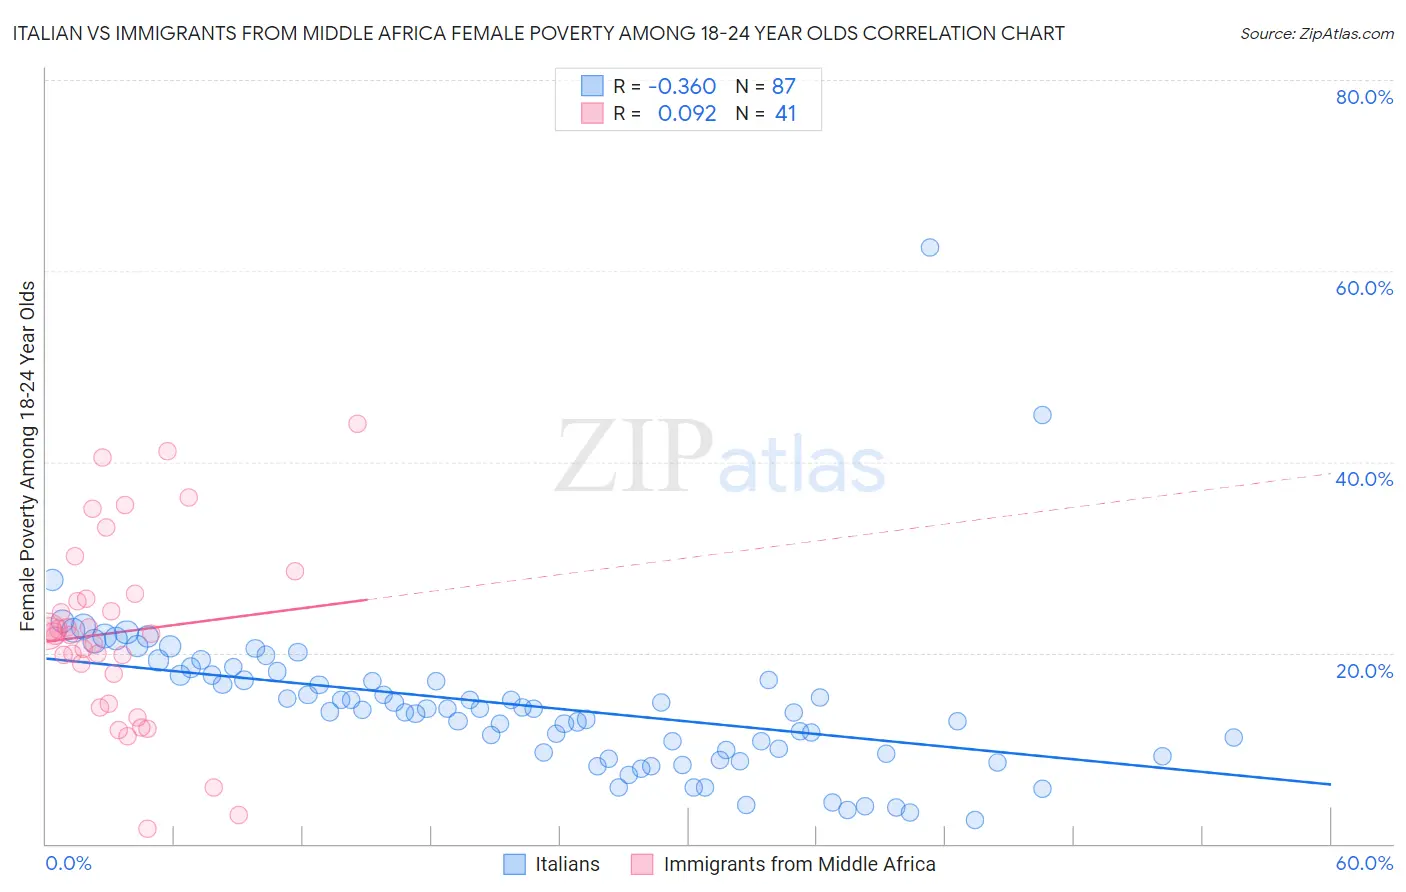 Italian vs Immigrants from Middle Africa Female Poverty Among 18-24 Year Olds